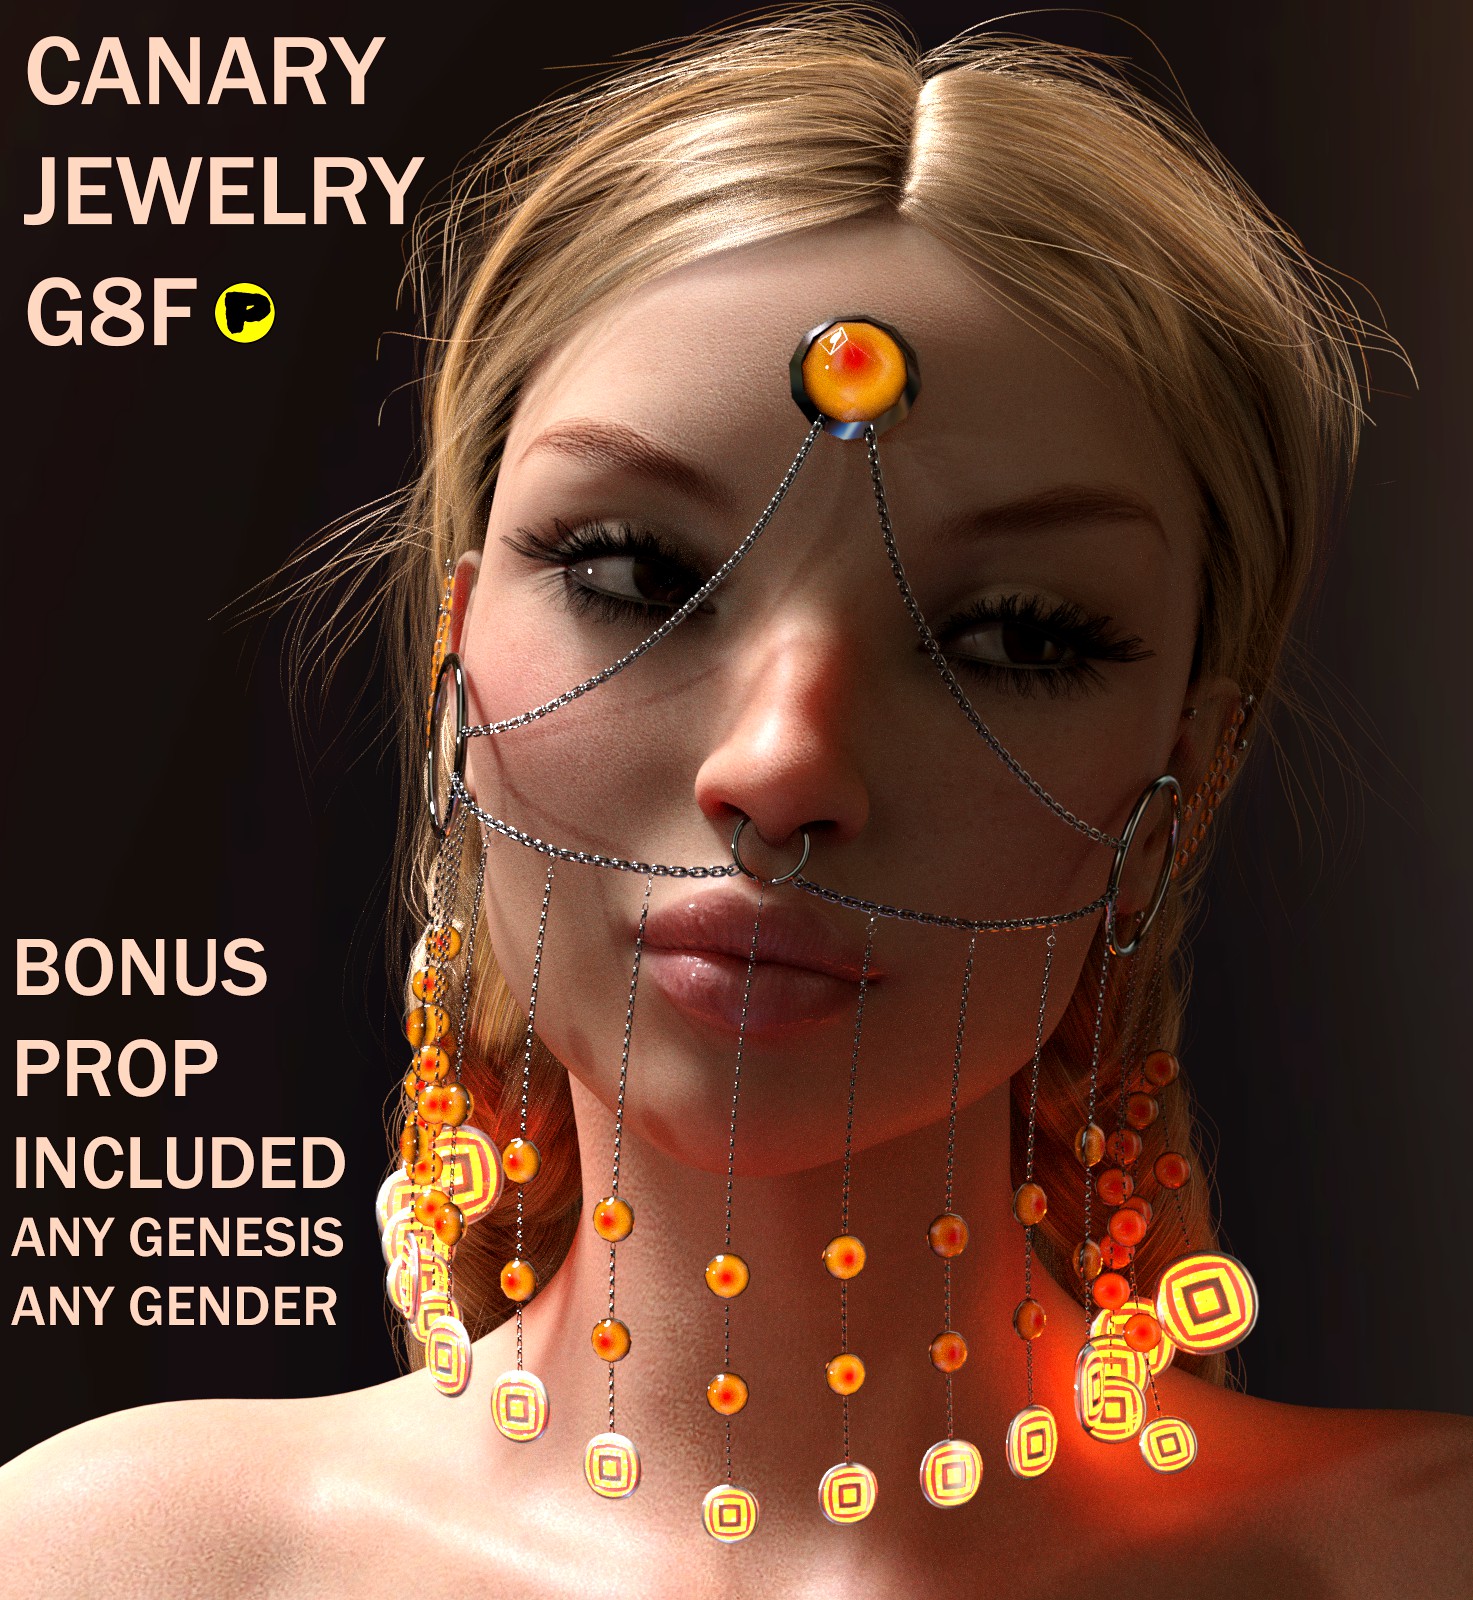 Canary Jewelry For G8F